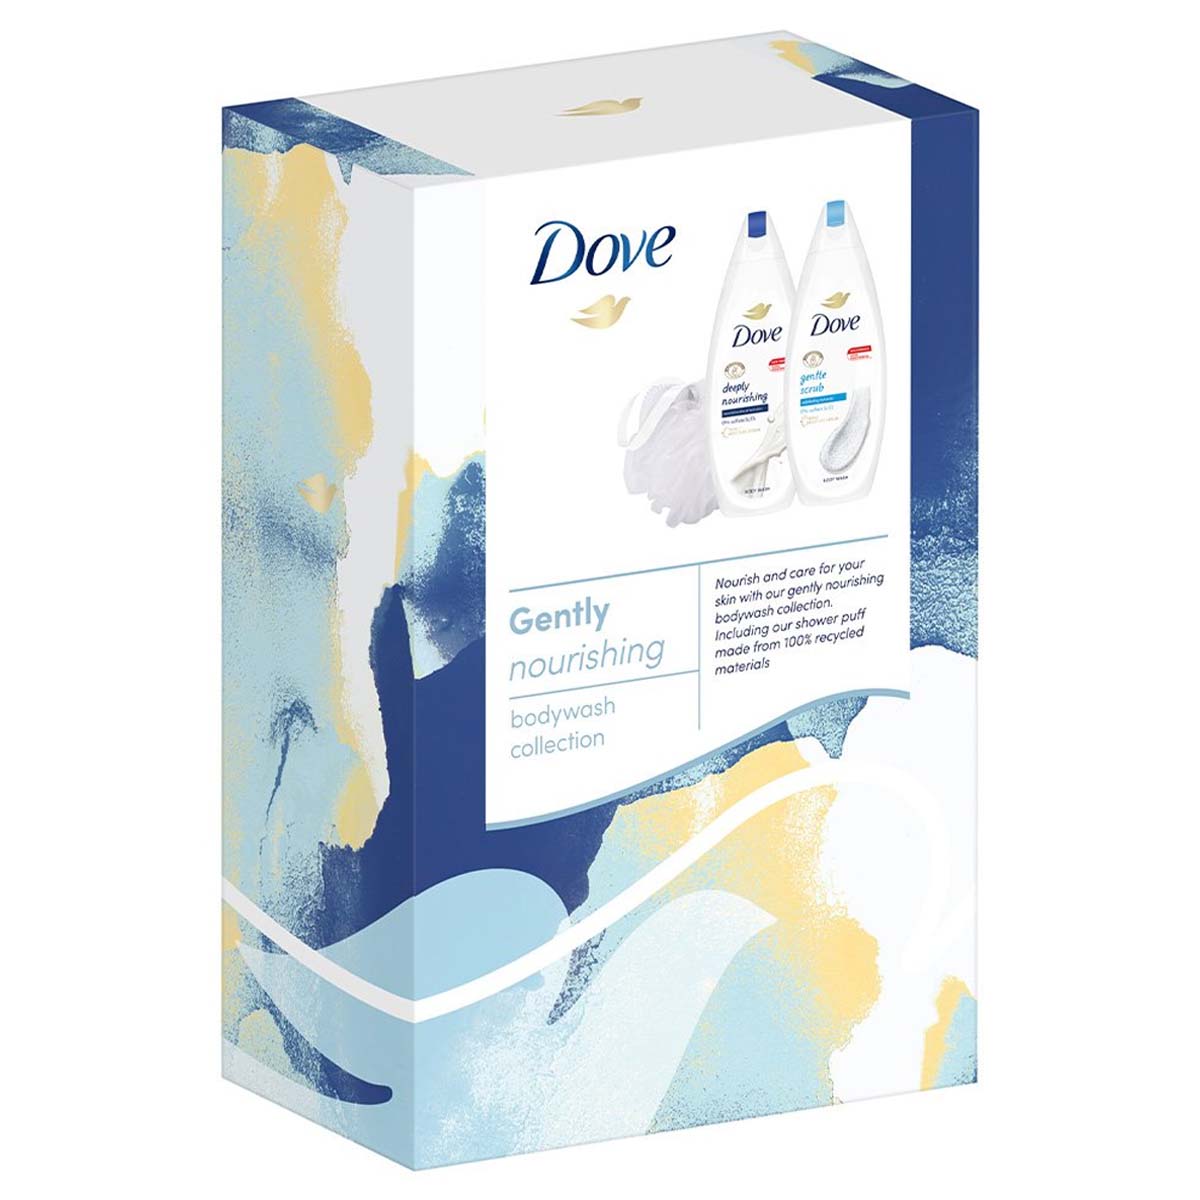 Dove - Gently Nourishing Body Wash Collection Gift Set - Continental Food Store